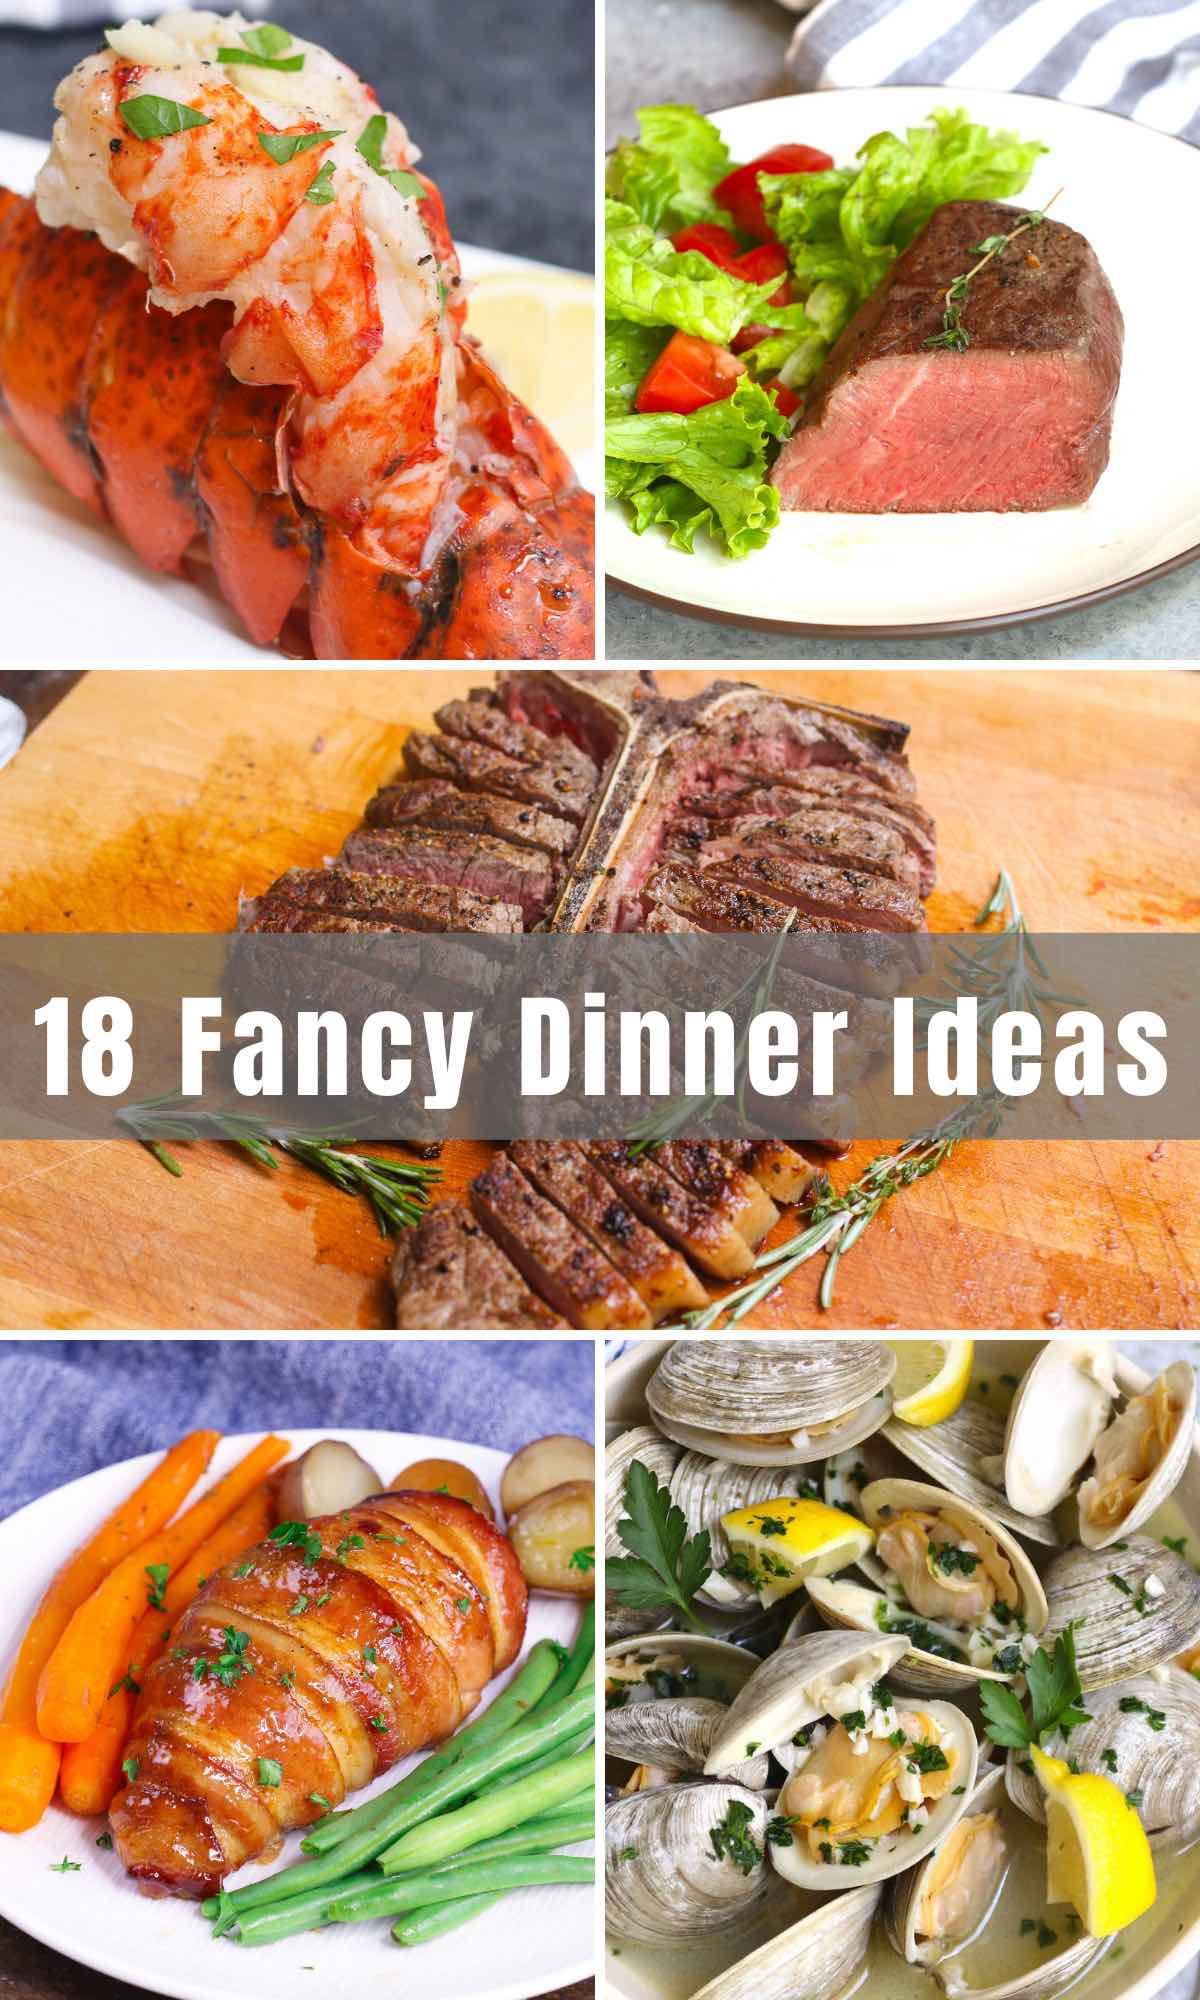 Whether you’re surprising someone with a romantic dinner or celebrating an anniversary, you can create restaurant-quality recipes at home for less than half the cost. We’ve collected 18 easy but Fancy Dinner Ideas that you can make at home.